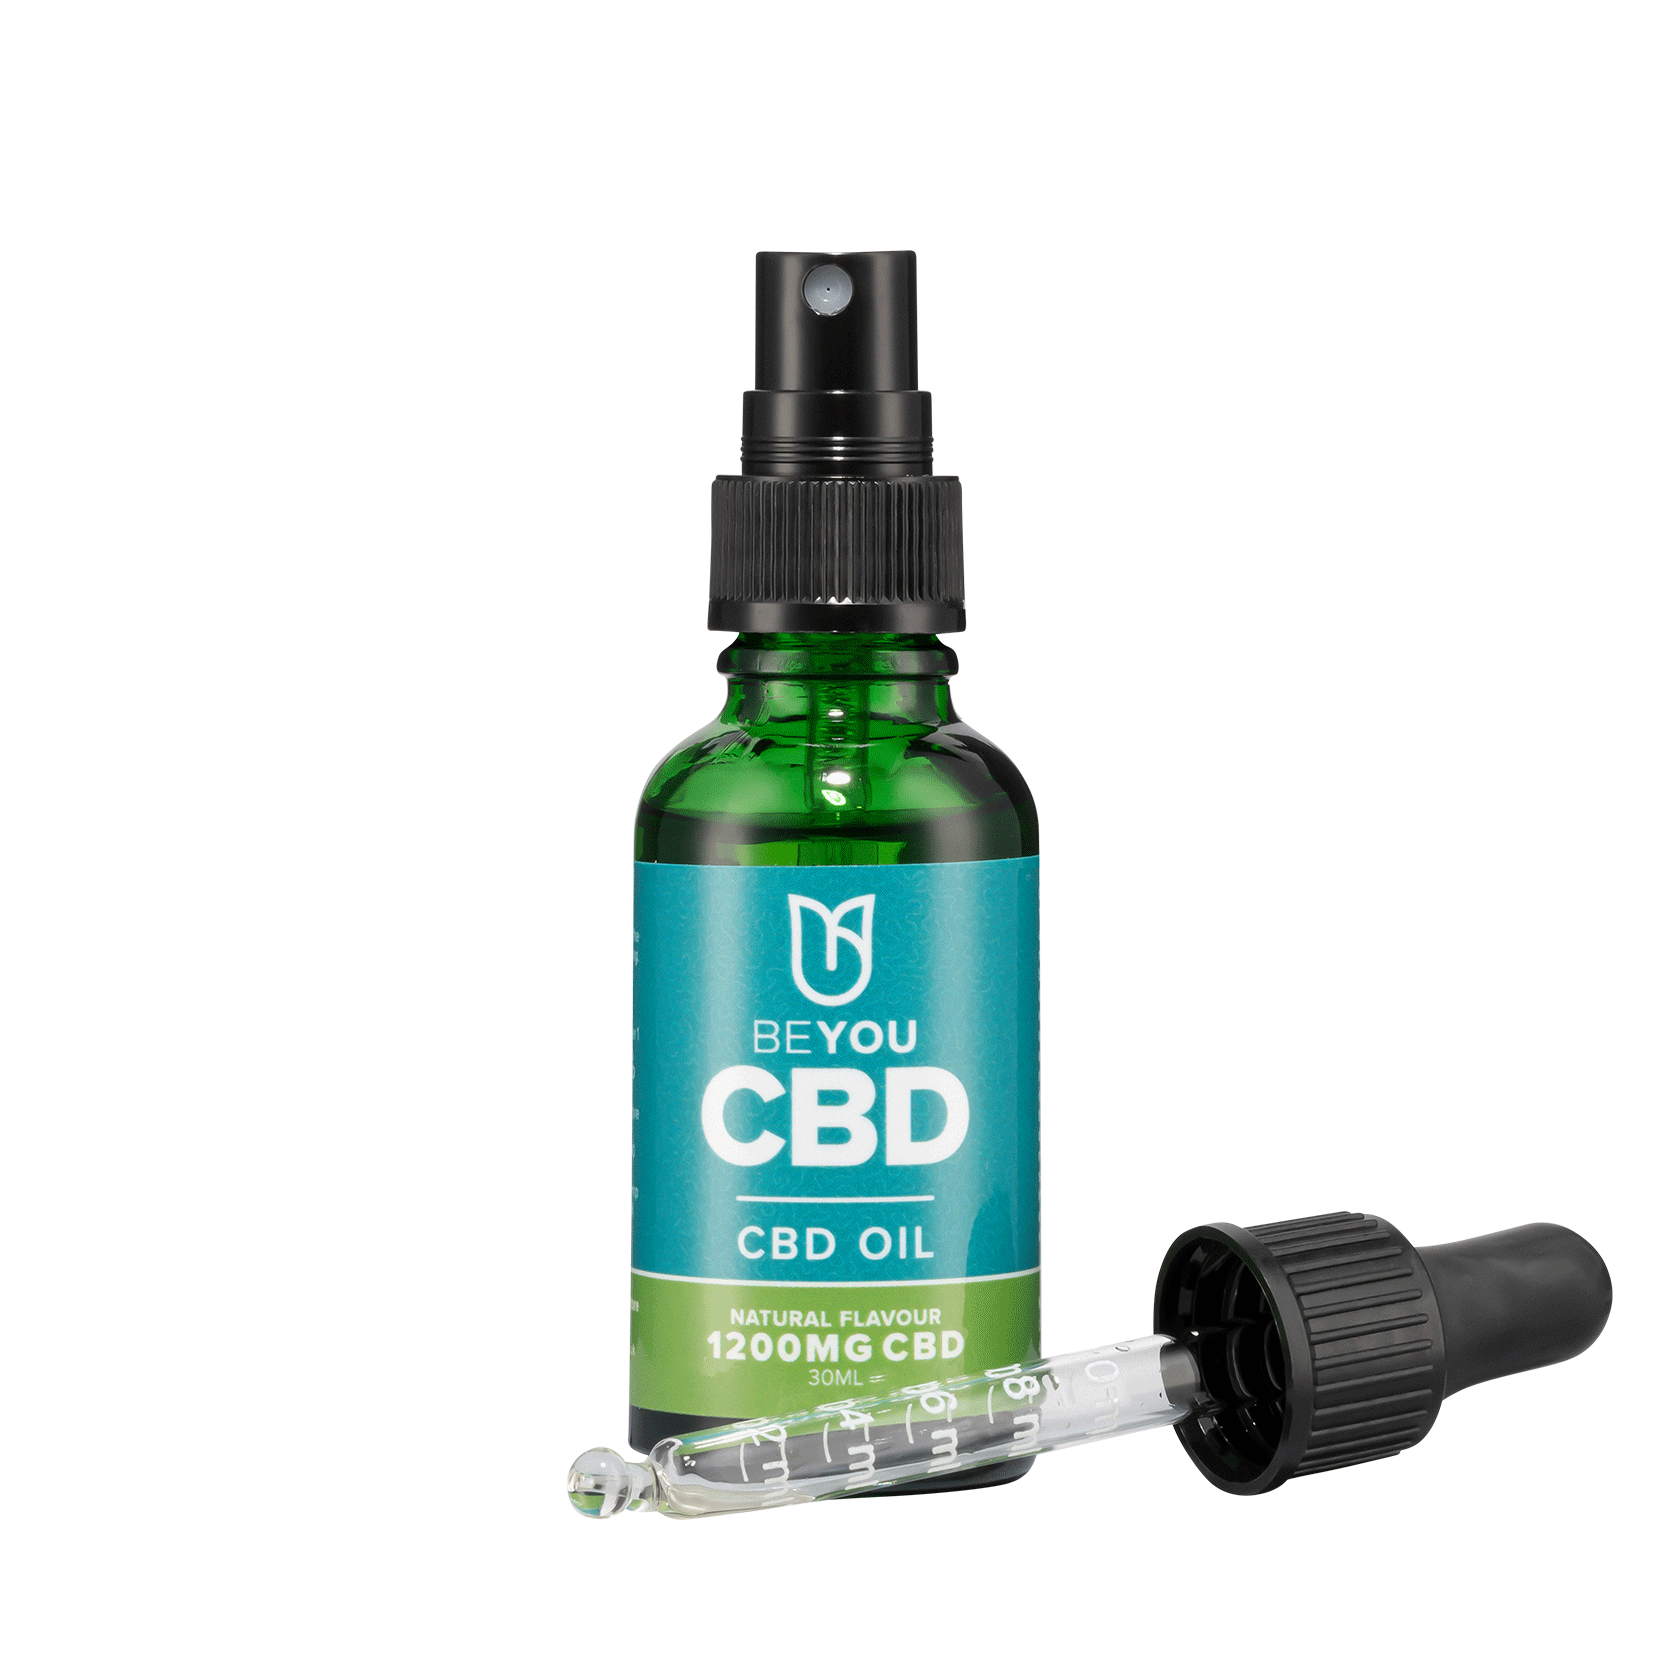 the best CBD oil comes as a CBD spray and CBD drops to give you all of the benefits of CBD